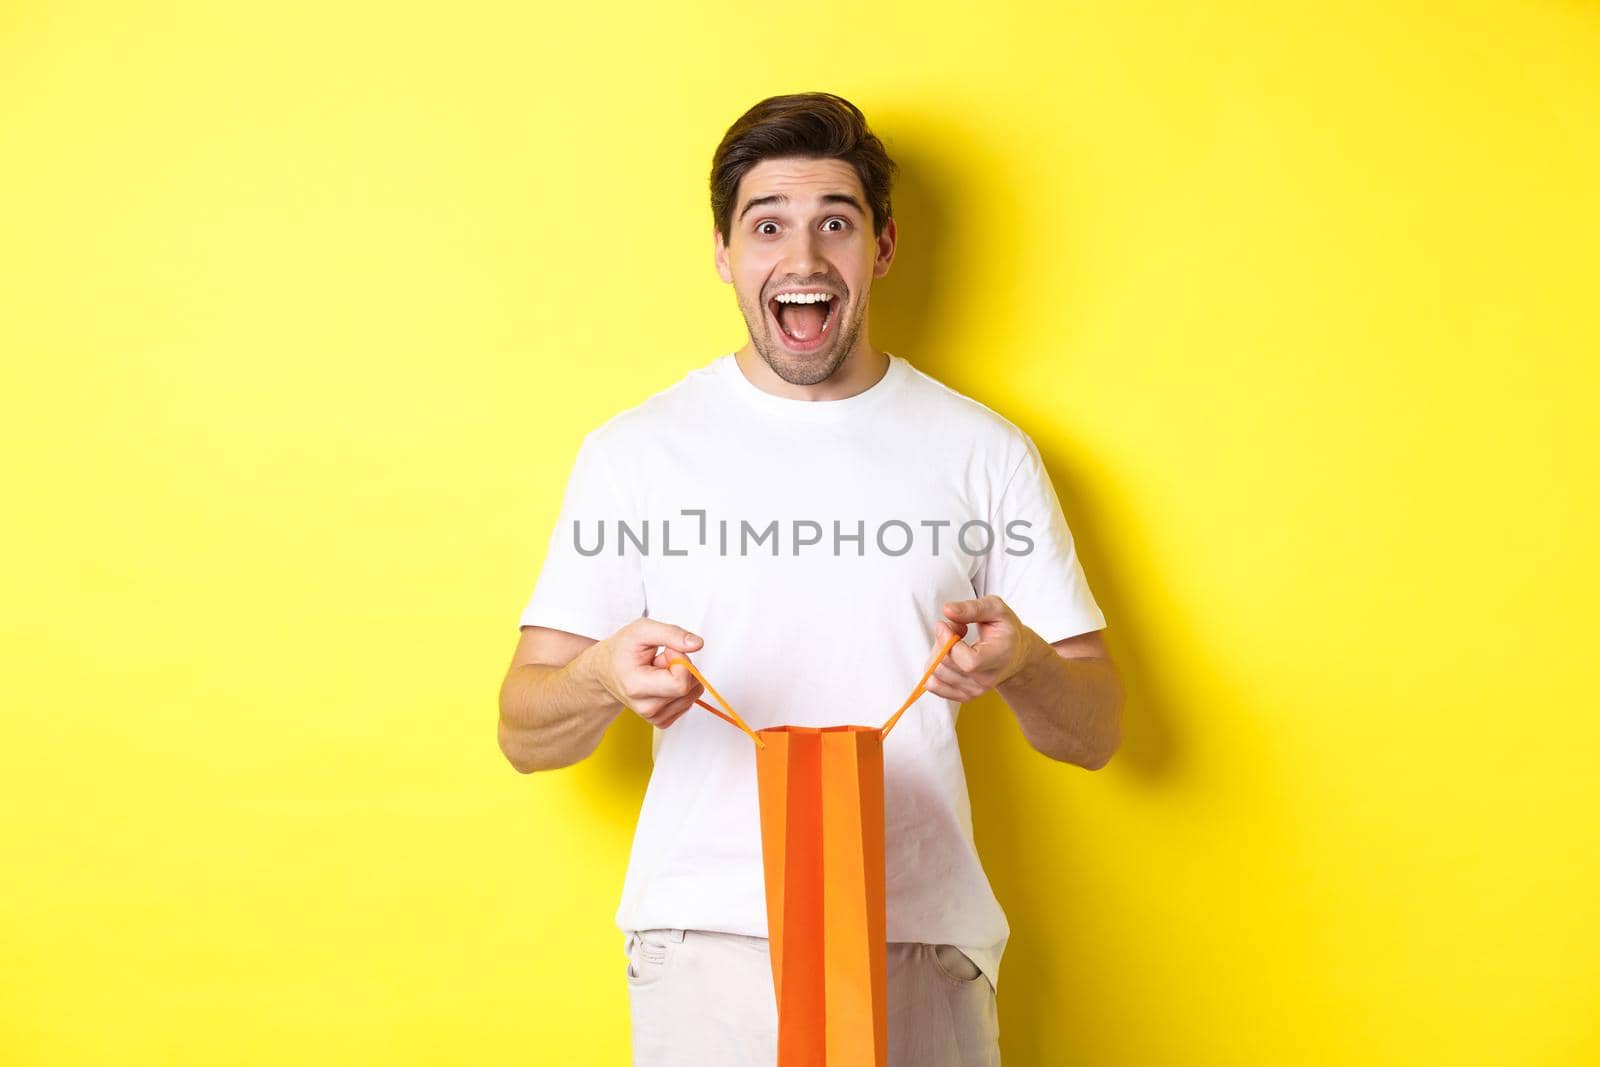 Surprised guy open shopping bag with fist, looking excited and happy at camera, standing against yellow background.